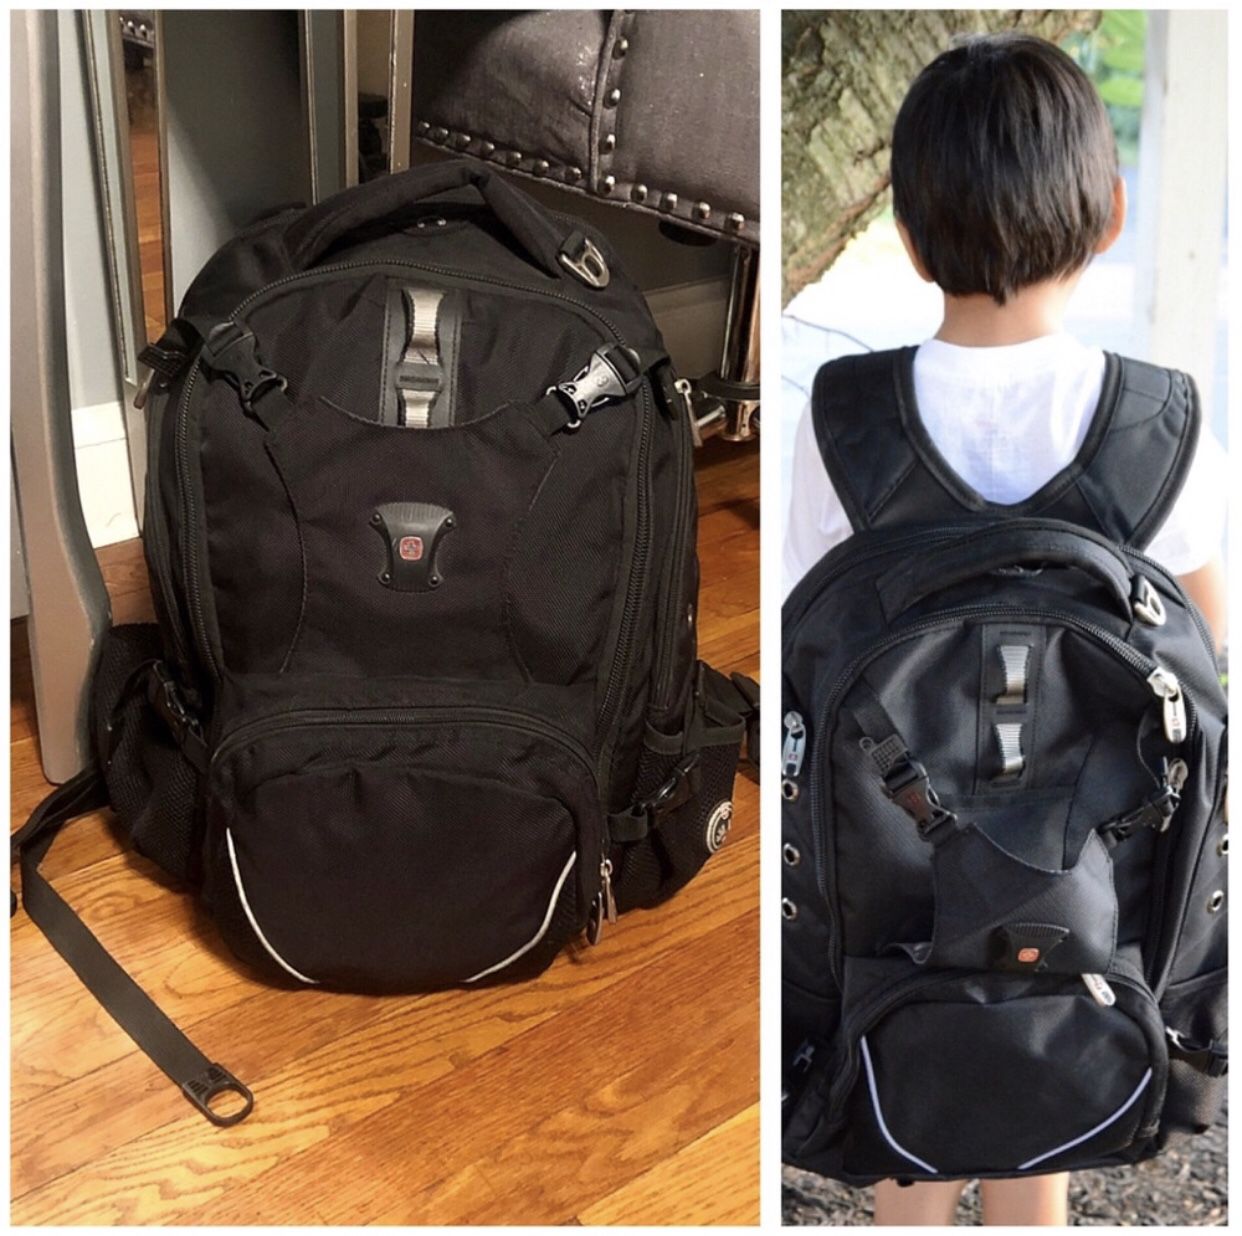 Loaded! Swiss Army backpack paid $105 With media pocket! Great condition. The maker of the genuine Swiss Army knife, backpack boasts a padded laptop